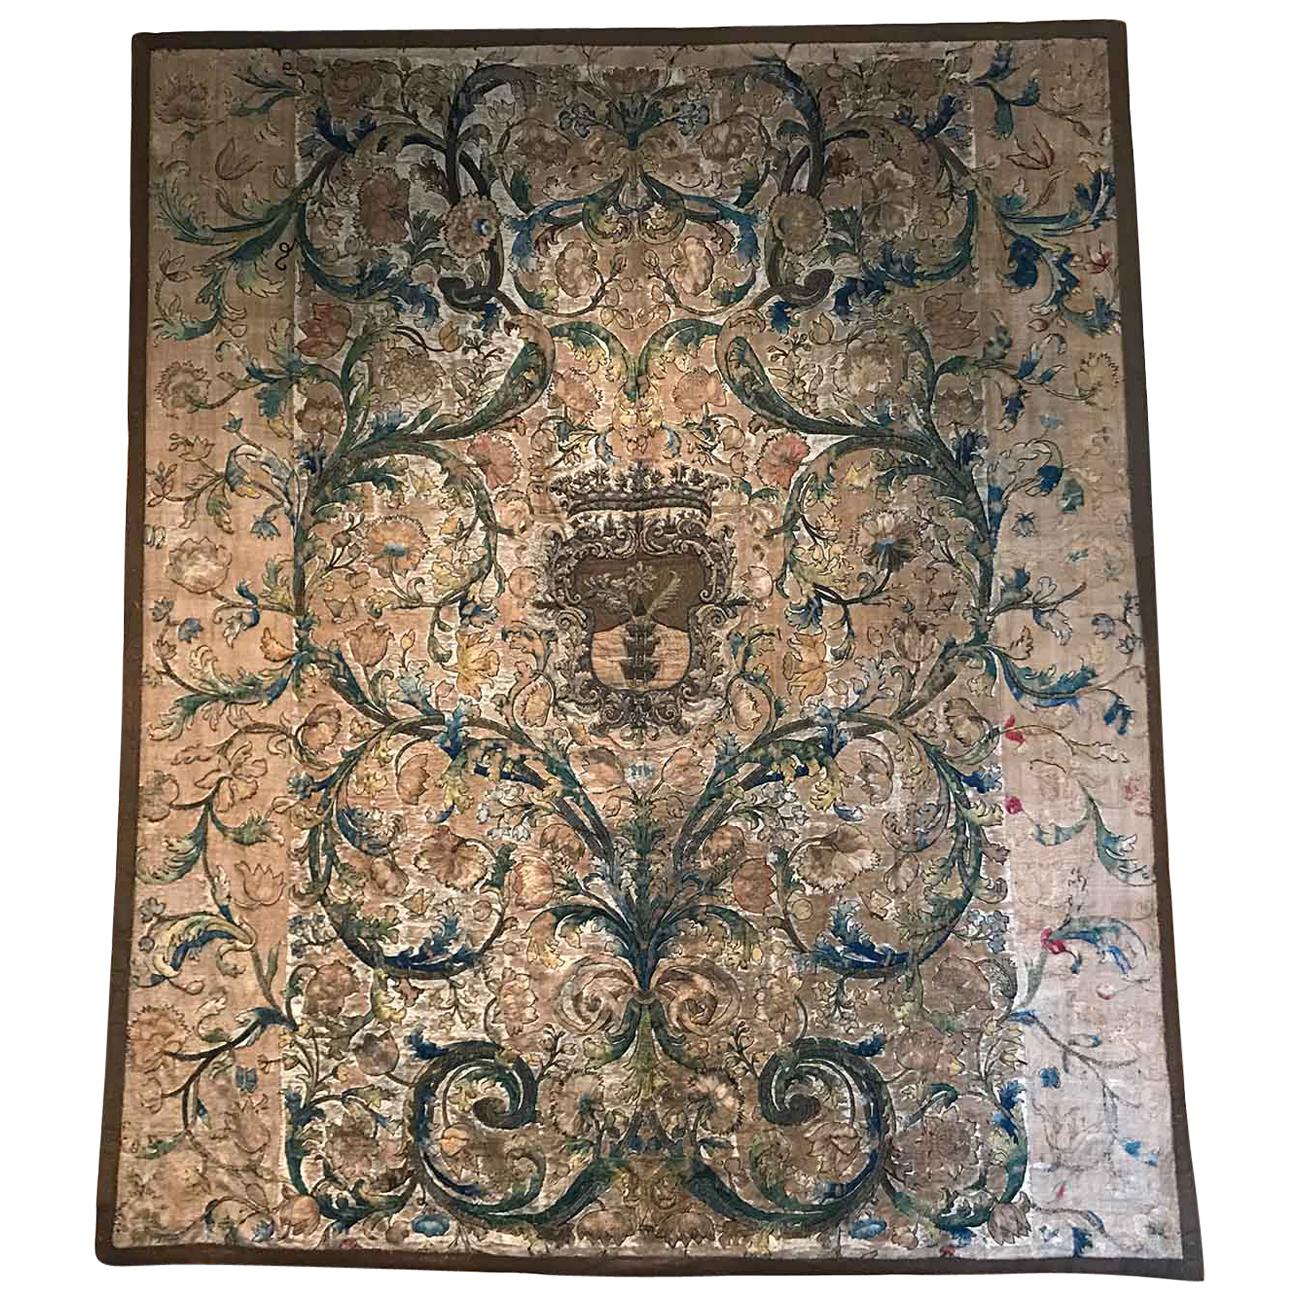 Needlework Tapestry with Intricate Shield and Floral Designs For Sale